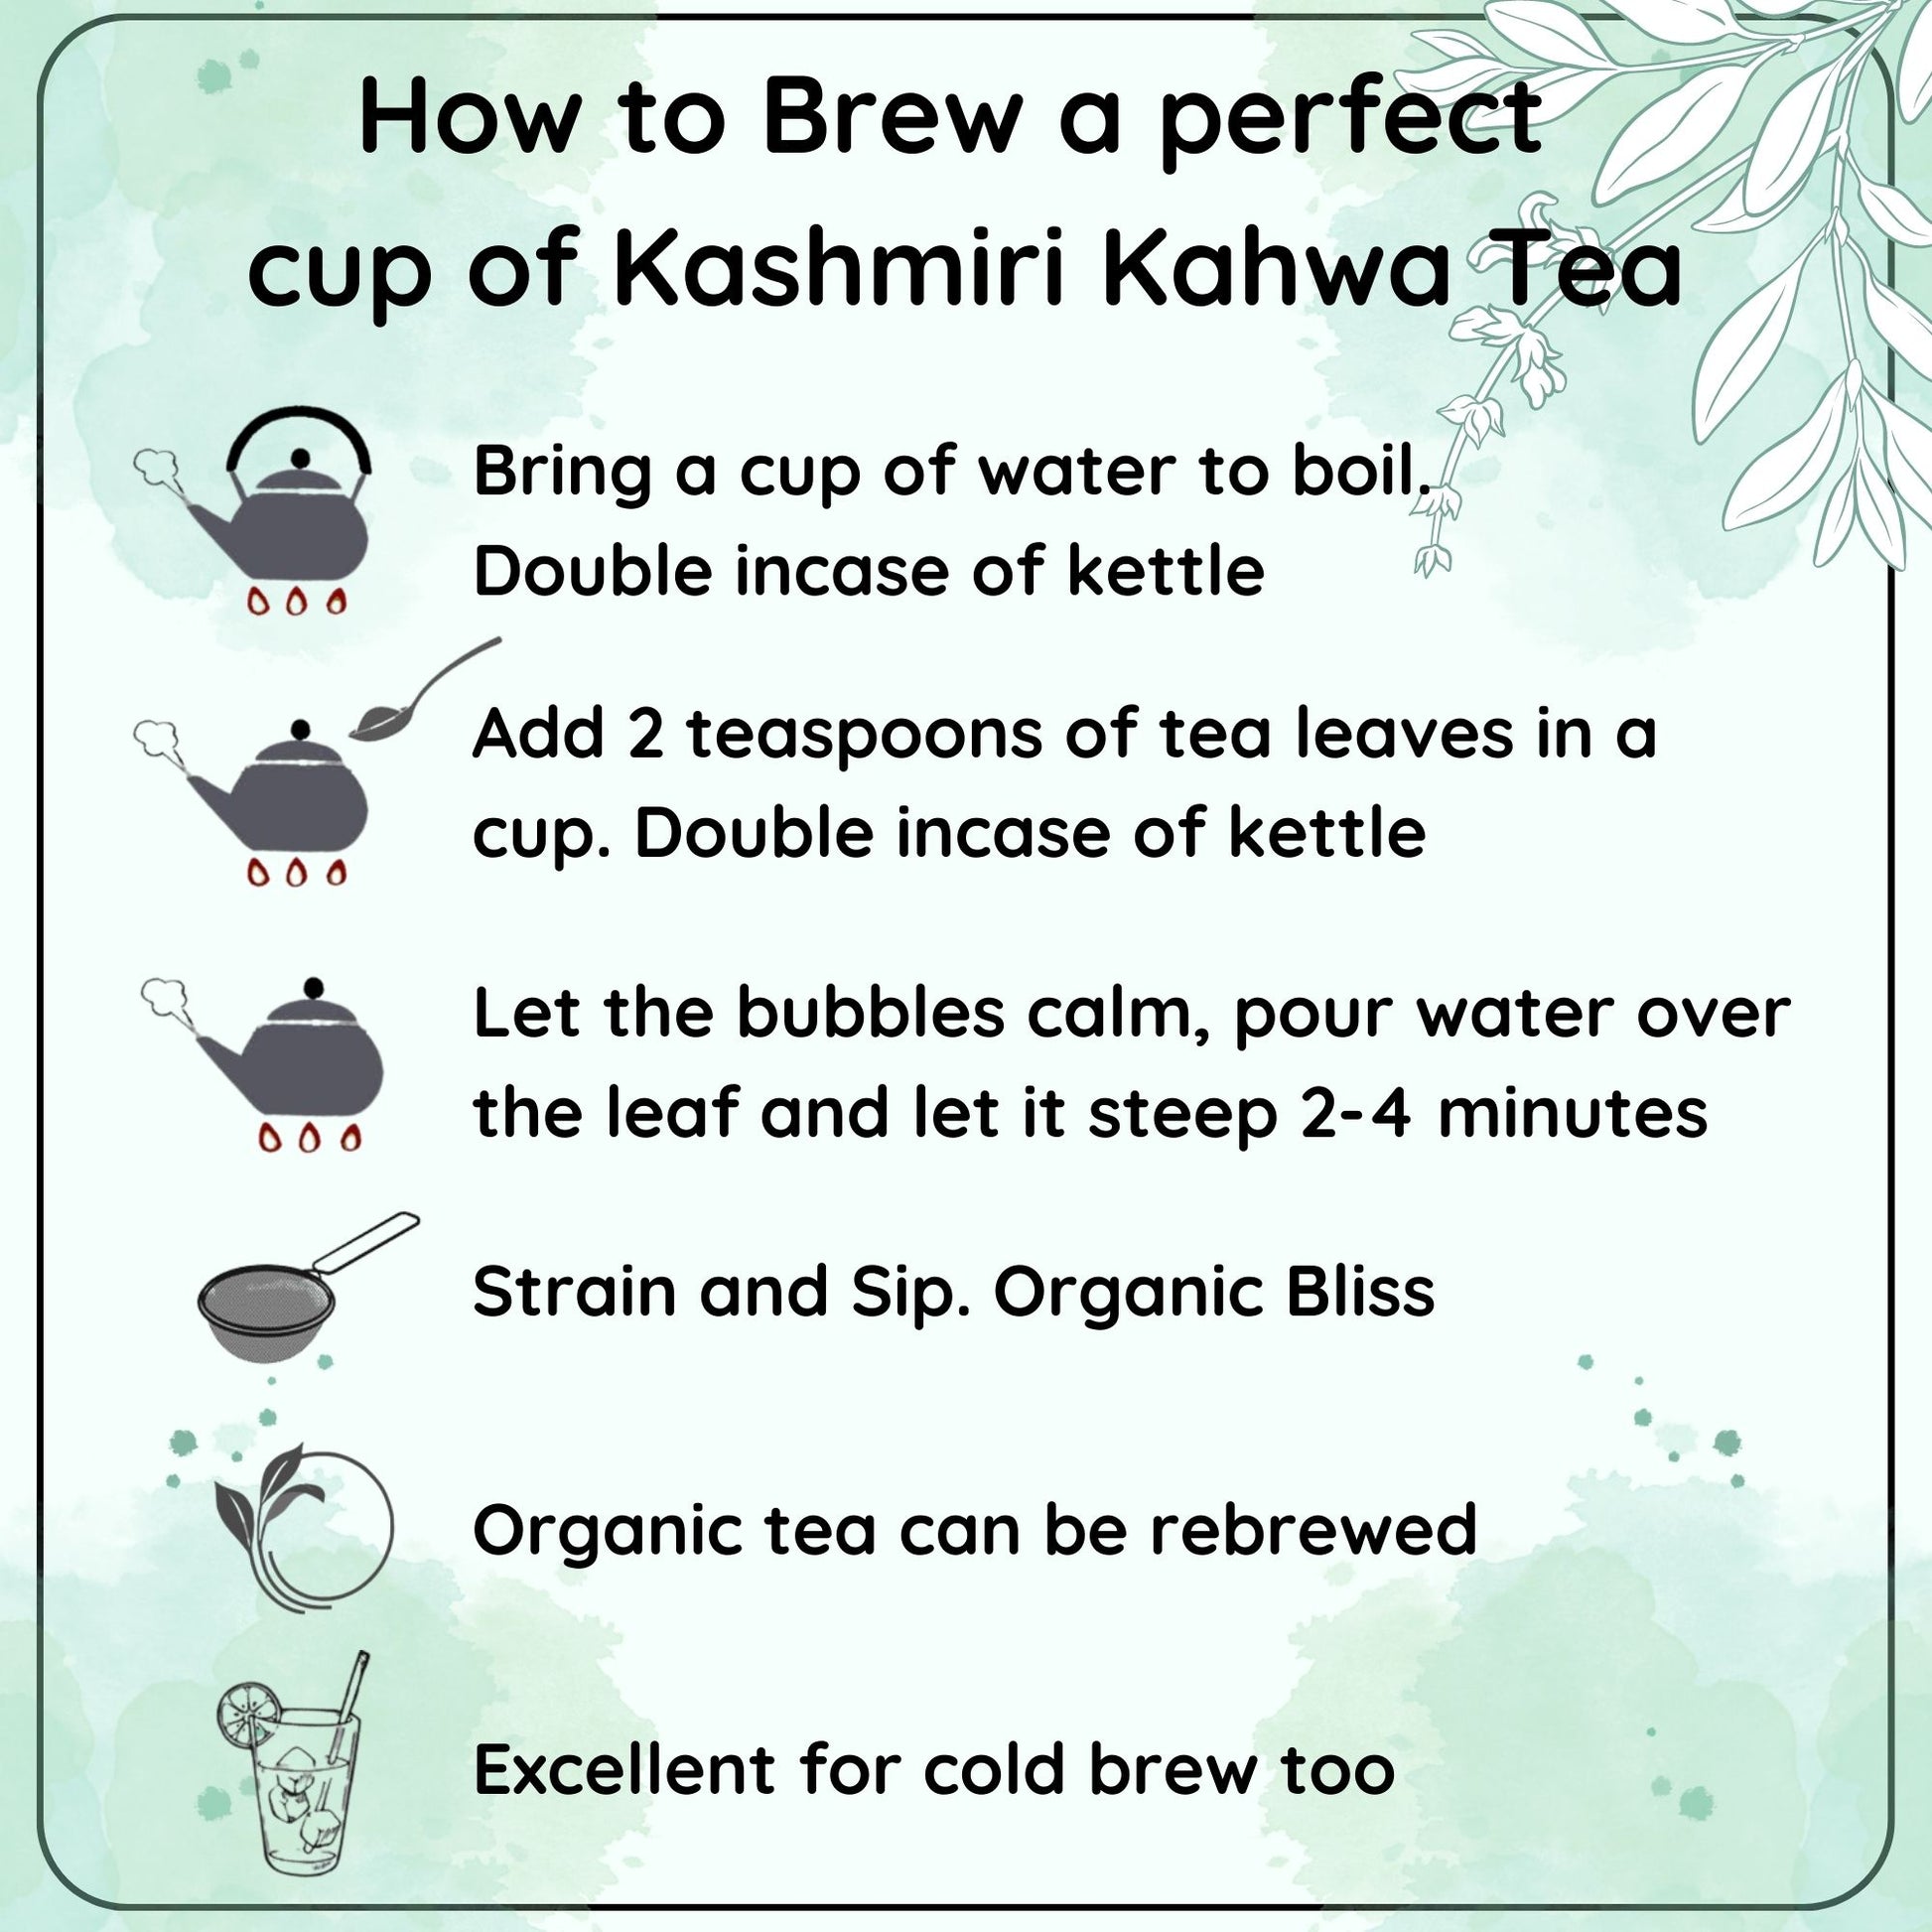 SOOTHING Almond Kashmiri Kahwa - Why You Should Try Almond Kashmiri Kahwa for Cold and Cough Relief - Radhikas Fine Teas and Whatnots